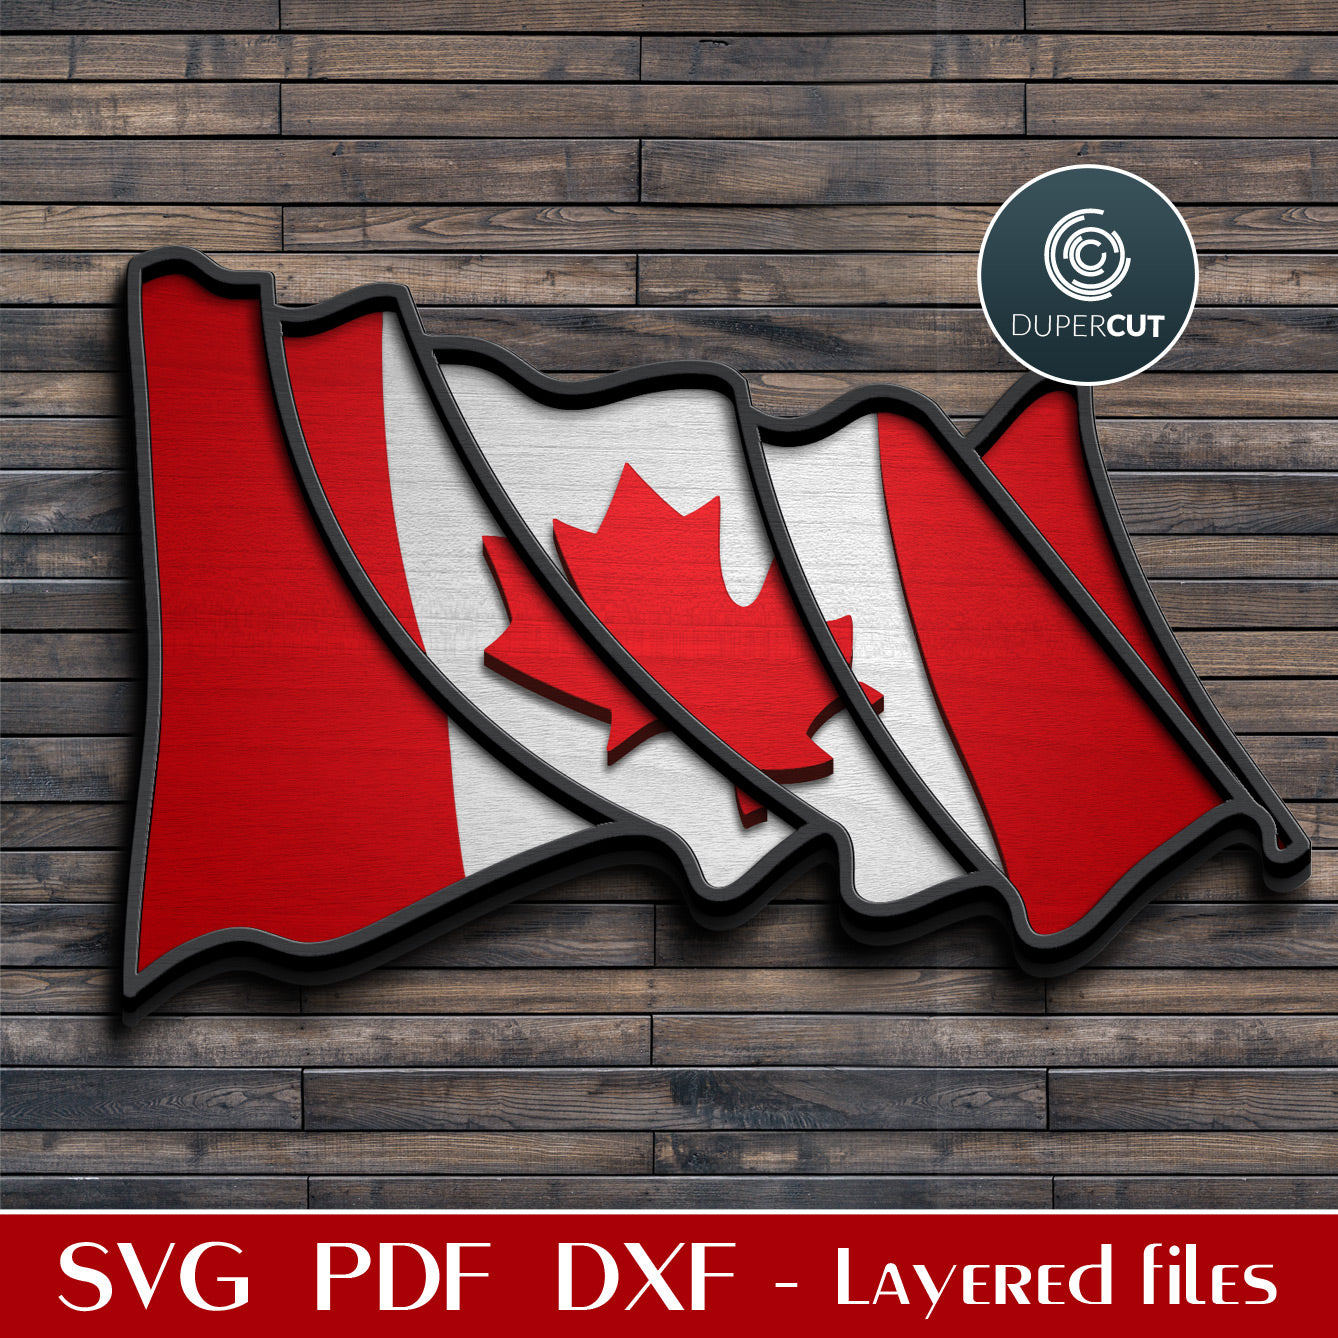 Canadia flag in the wind layered cut files - SVG DXF laser template for Glowforge, Xtool, Cricut, CNC plasma machines, scroll saw pattern by www.DuperCut.com